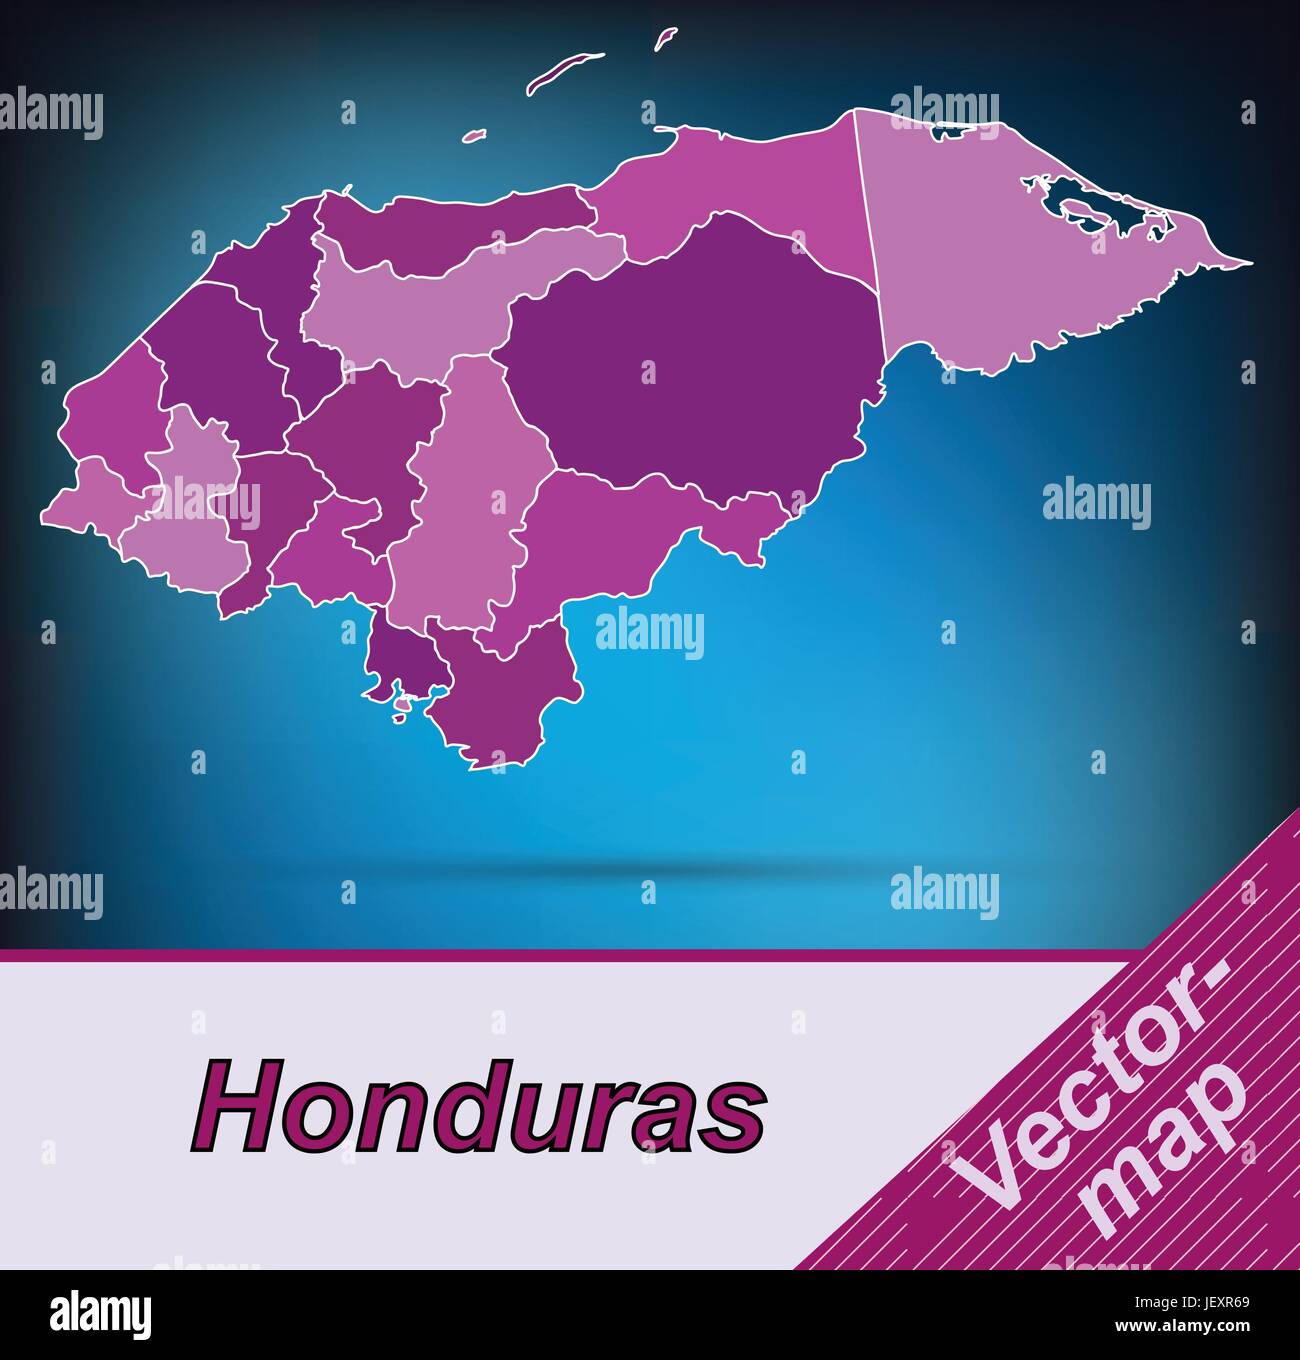 border map of honduras with borders in violet Stock Vector